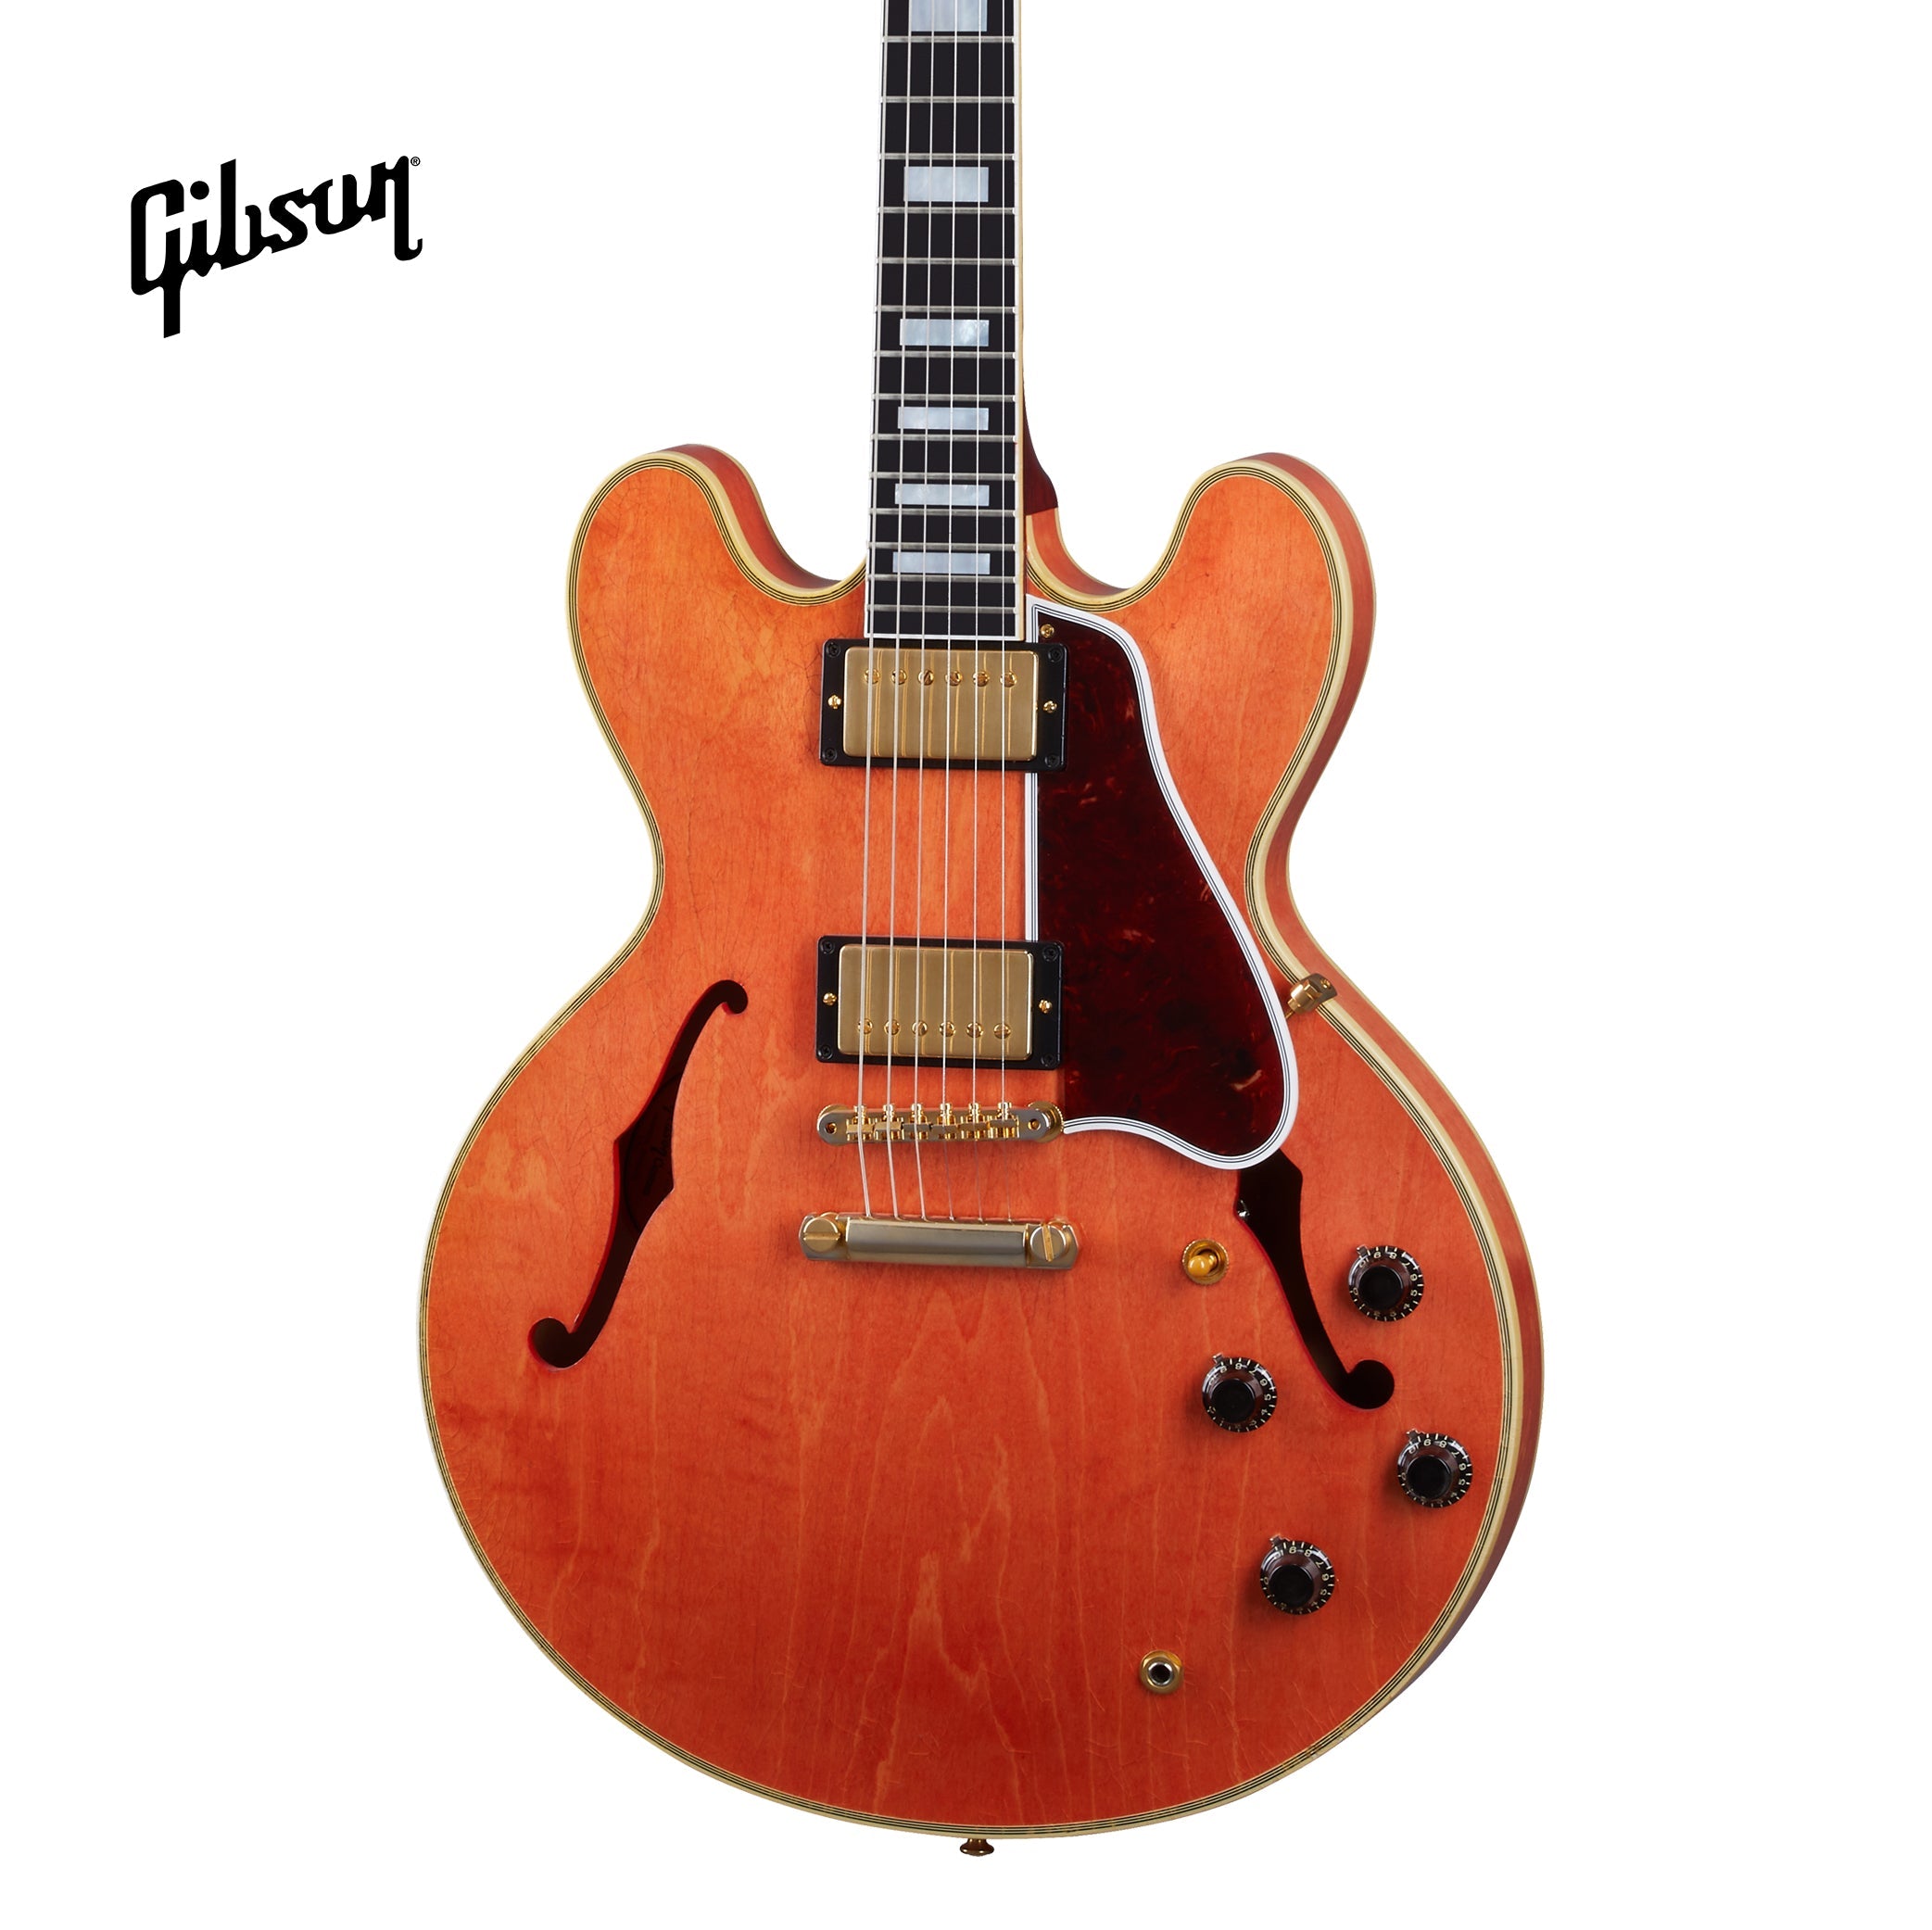 GIBSON 1959 ES-355 REISSUE STOP BAR LIGHT AGED SEMI-HOLLOWBODY ELECTRIC GUITAR - WATERMELON RED